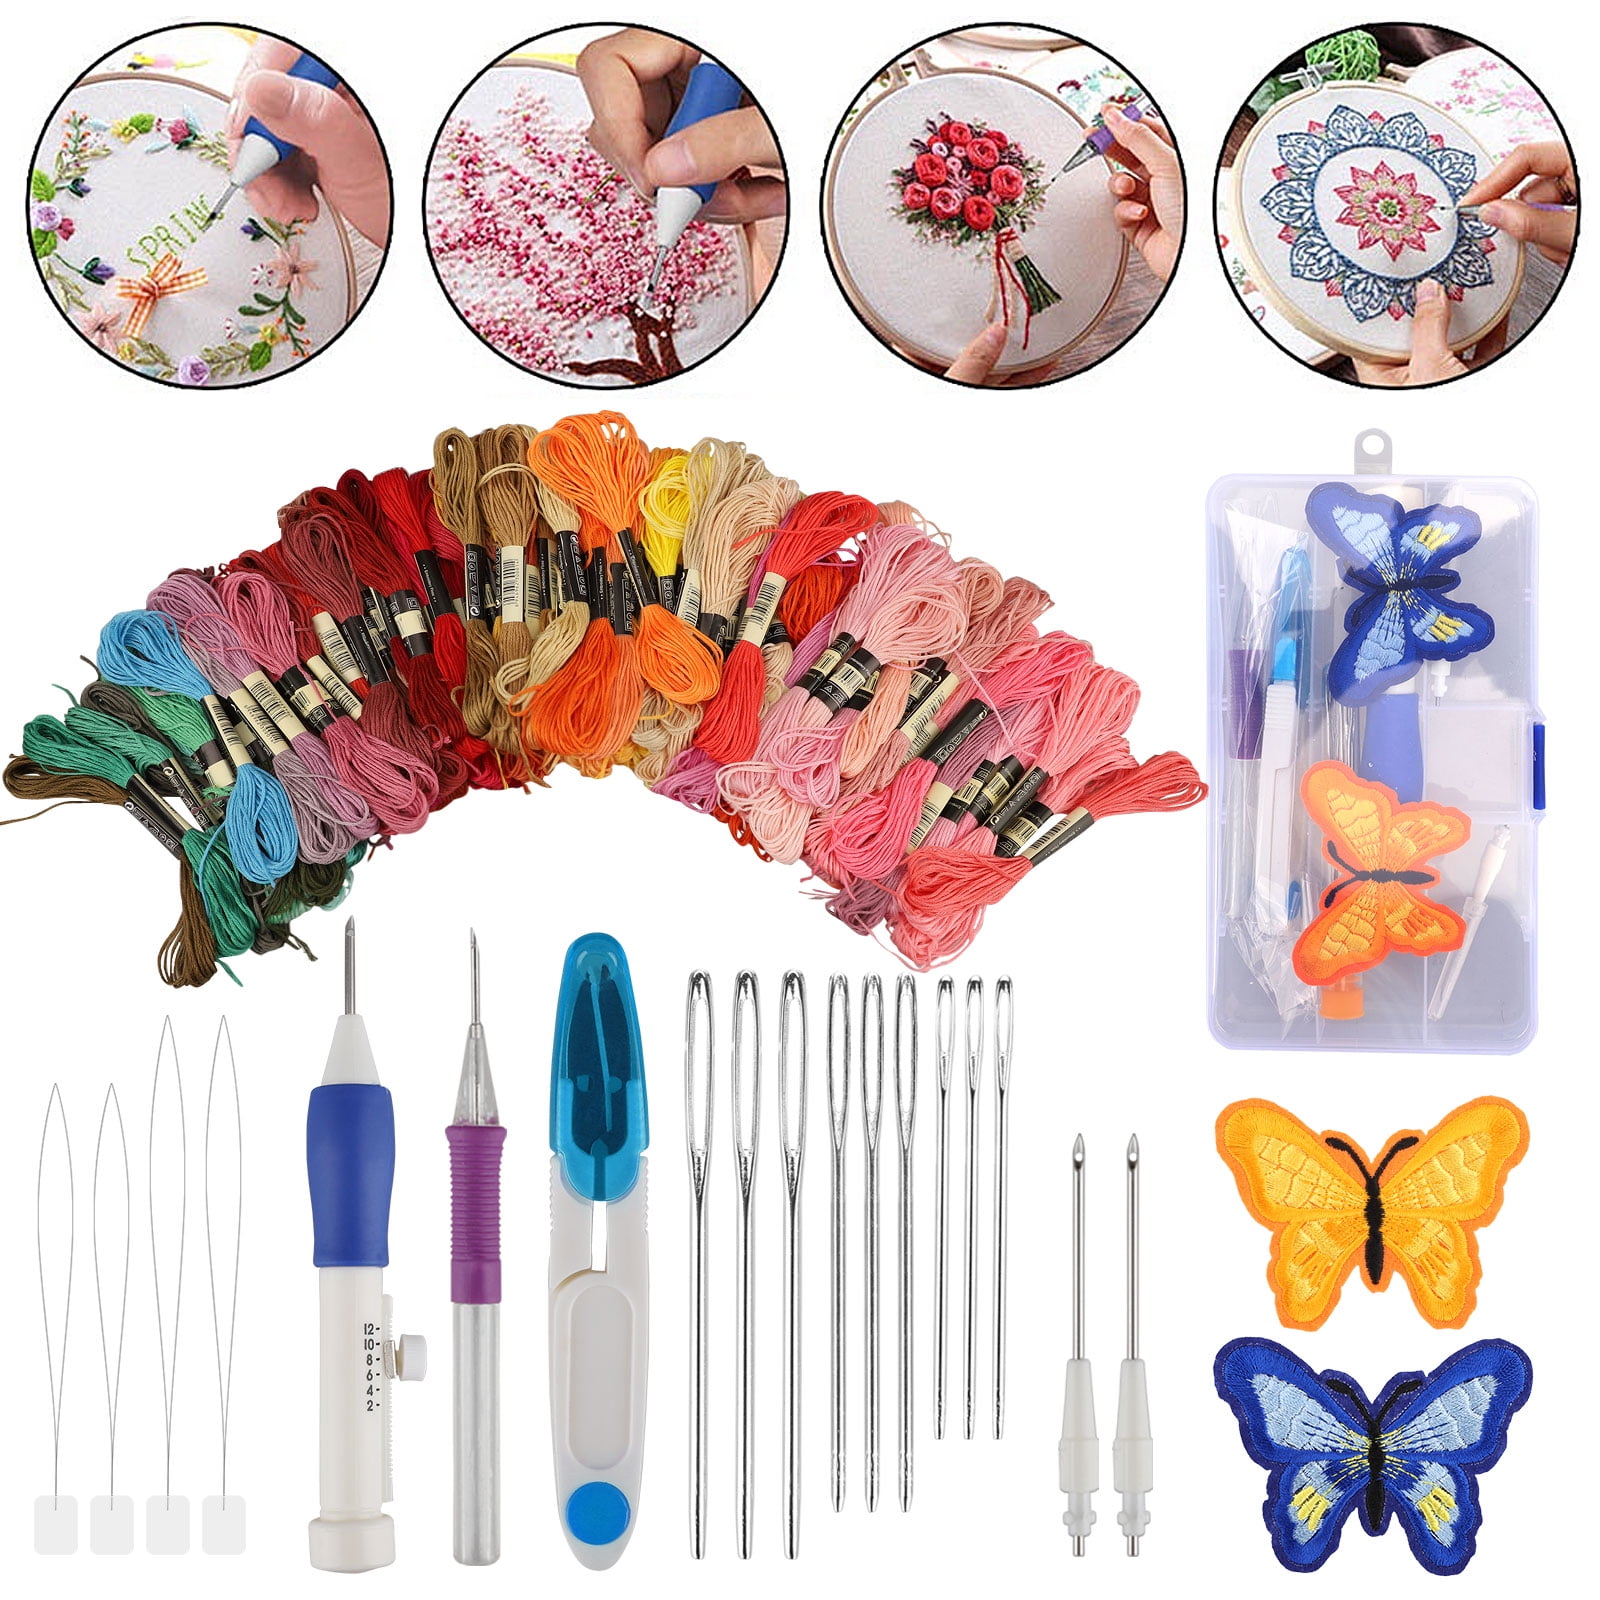 50 Colorful Embroidery Thread Starter Kit Fabric-set Cross Stitch Craft Tools US for sale online 